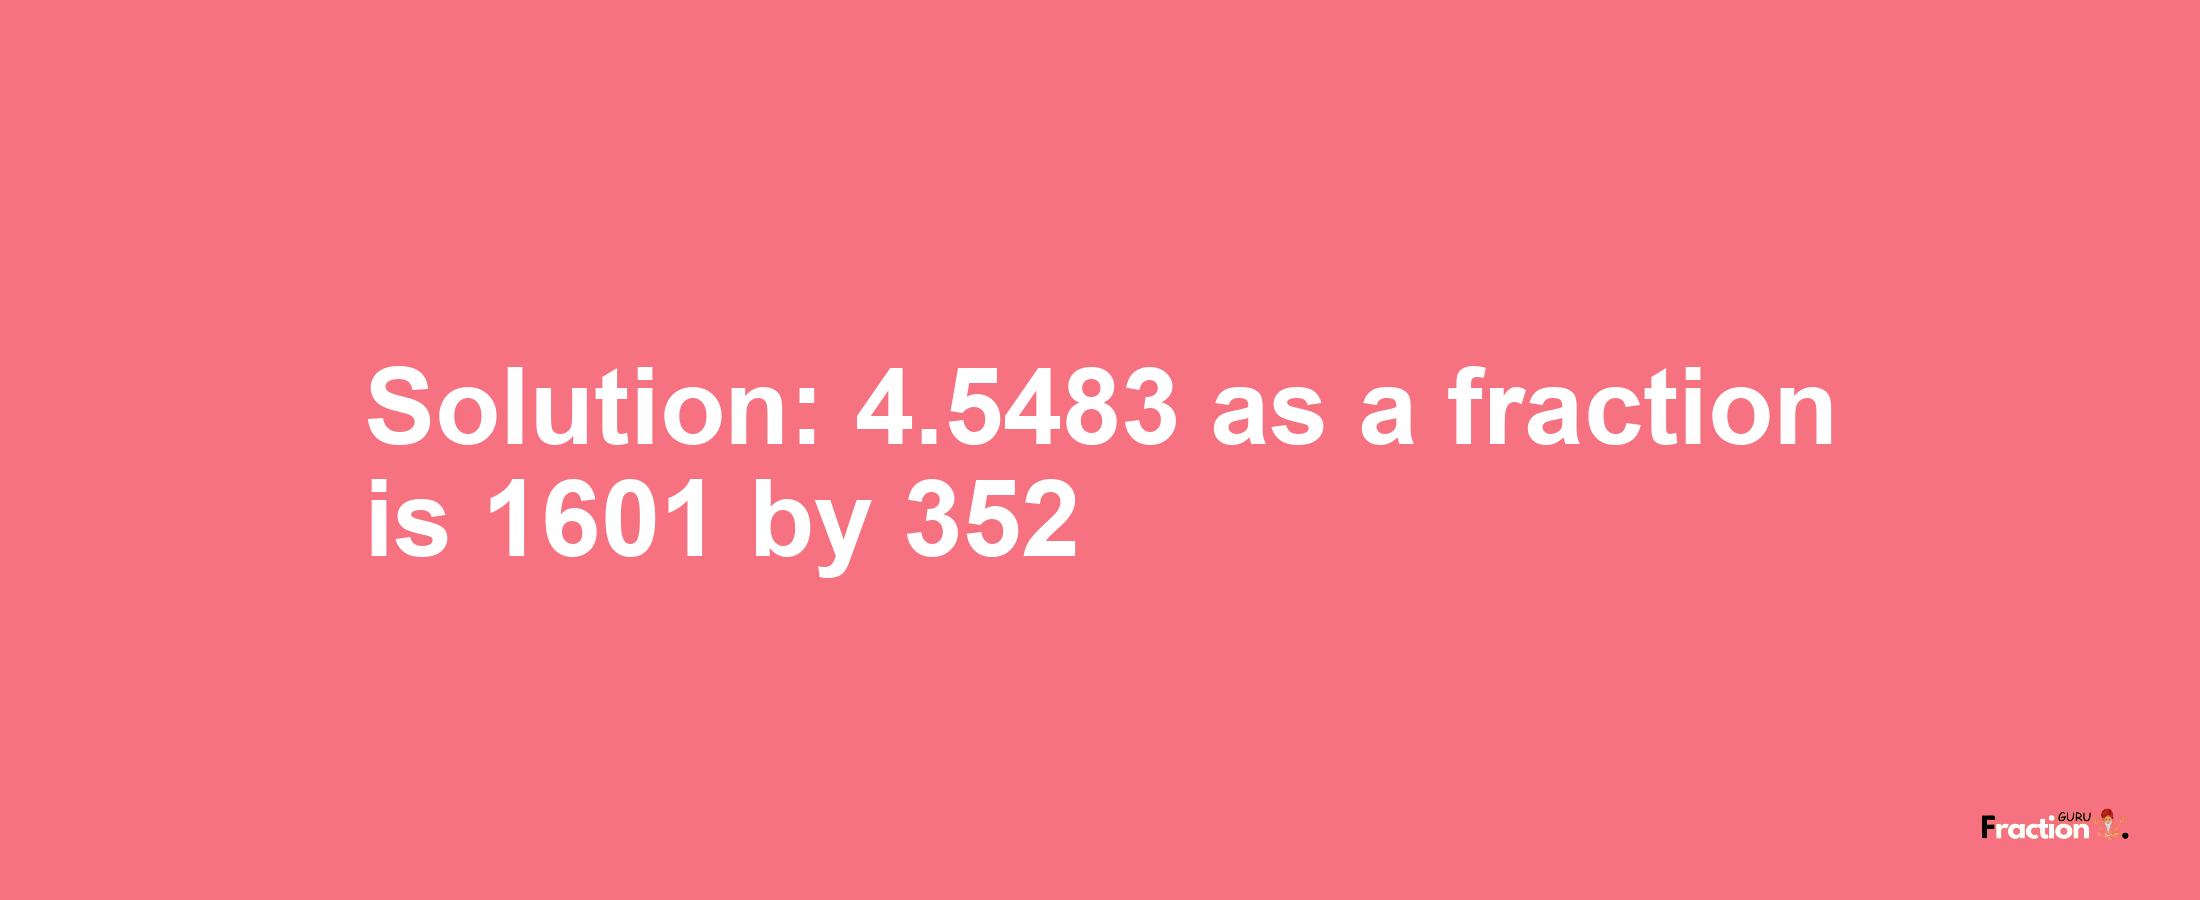 Solution:4.5483 as a fraction is 1601/352